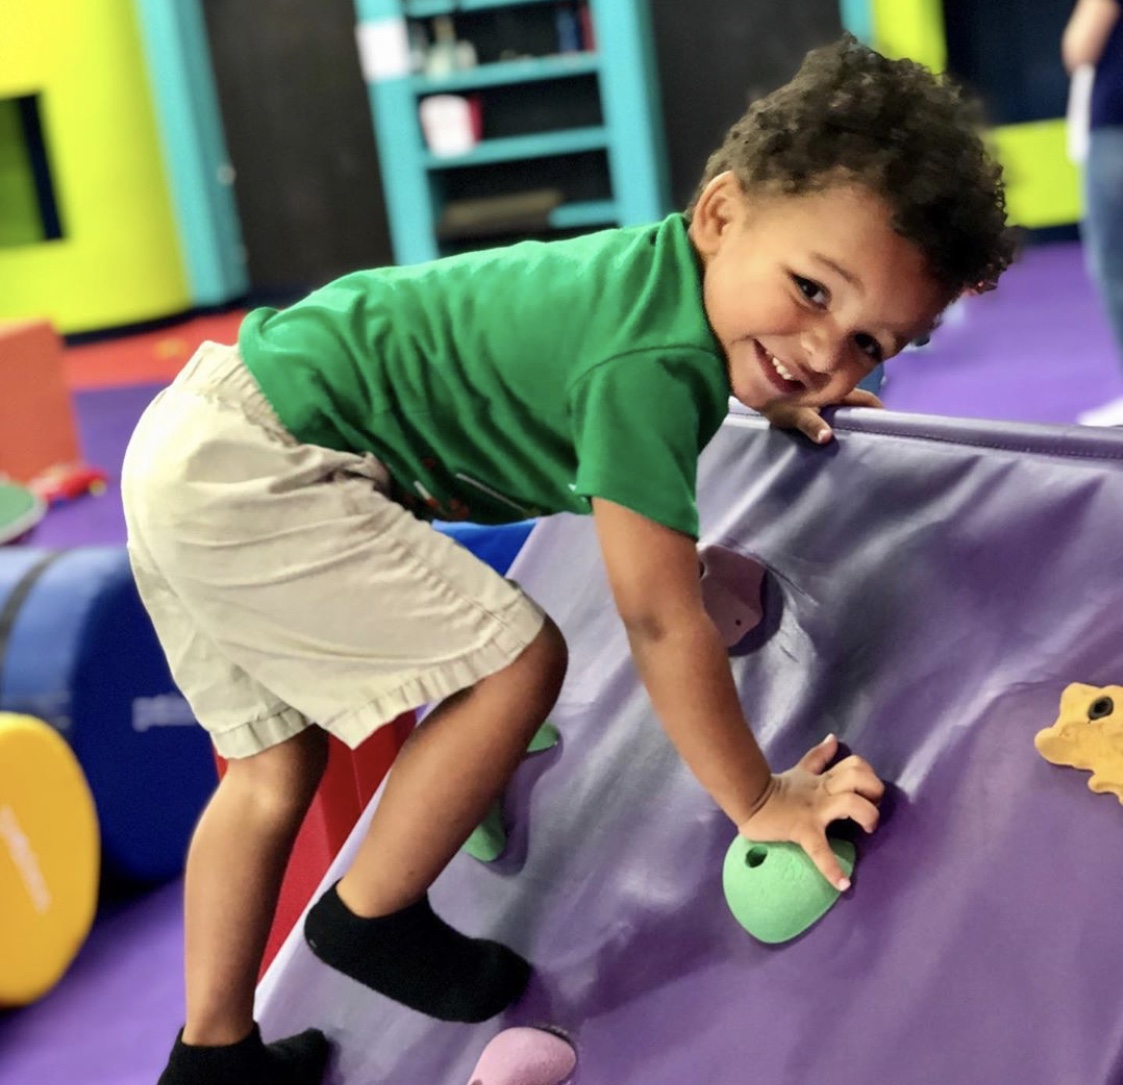 Come play, learn, and explore with us at Romp n' Roll Katy!